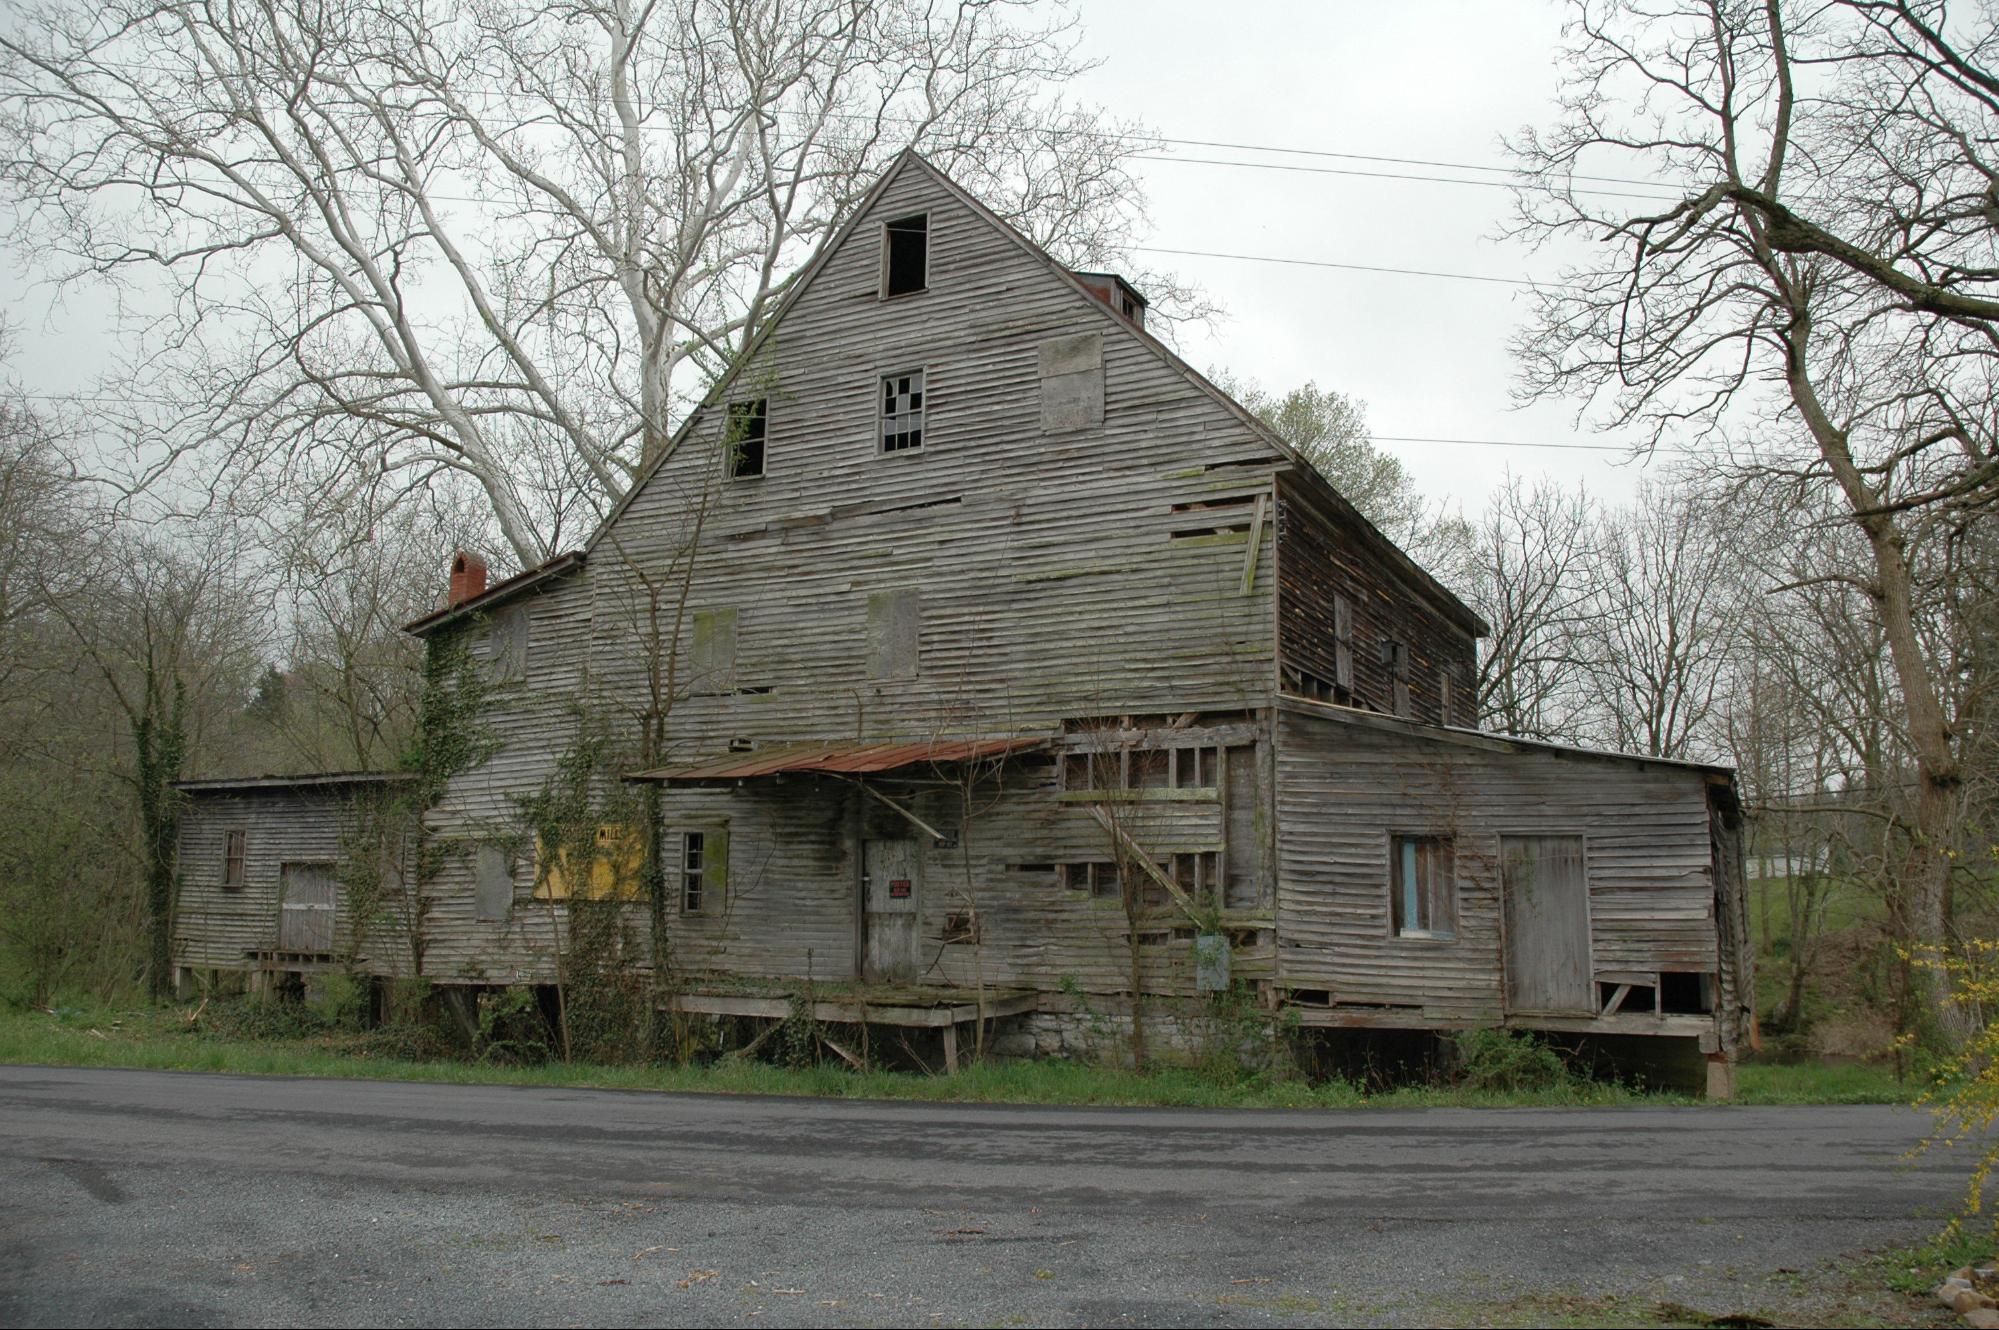 The Lantz Mill as purchased on December 19, 2006